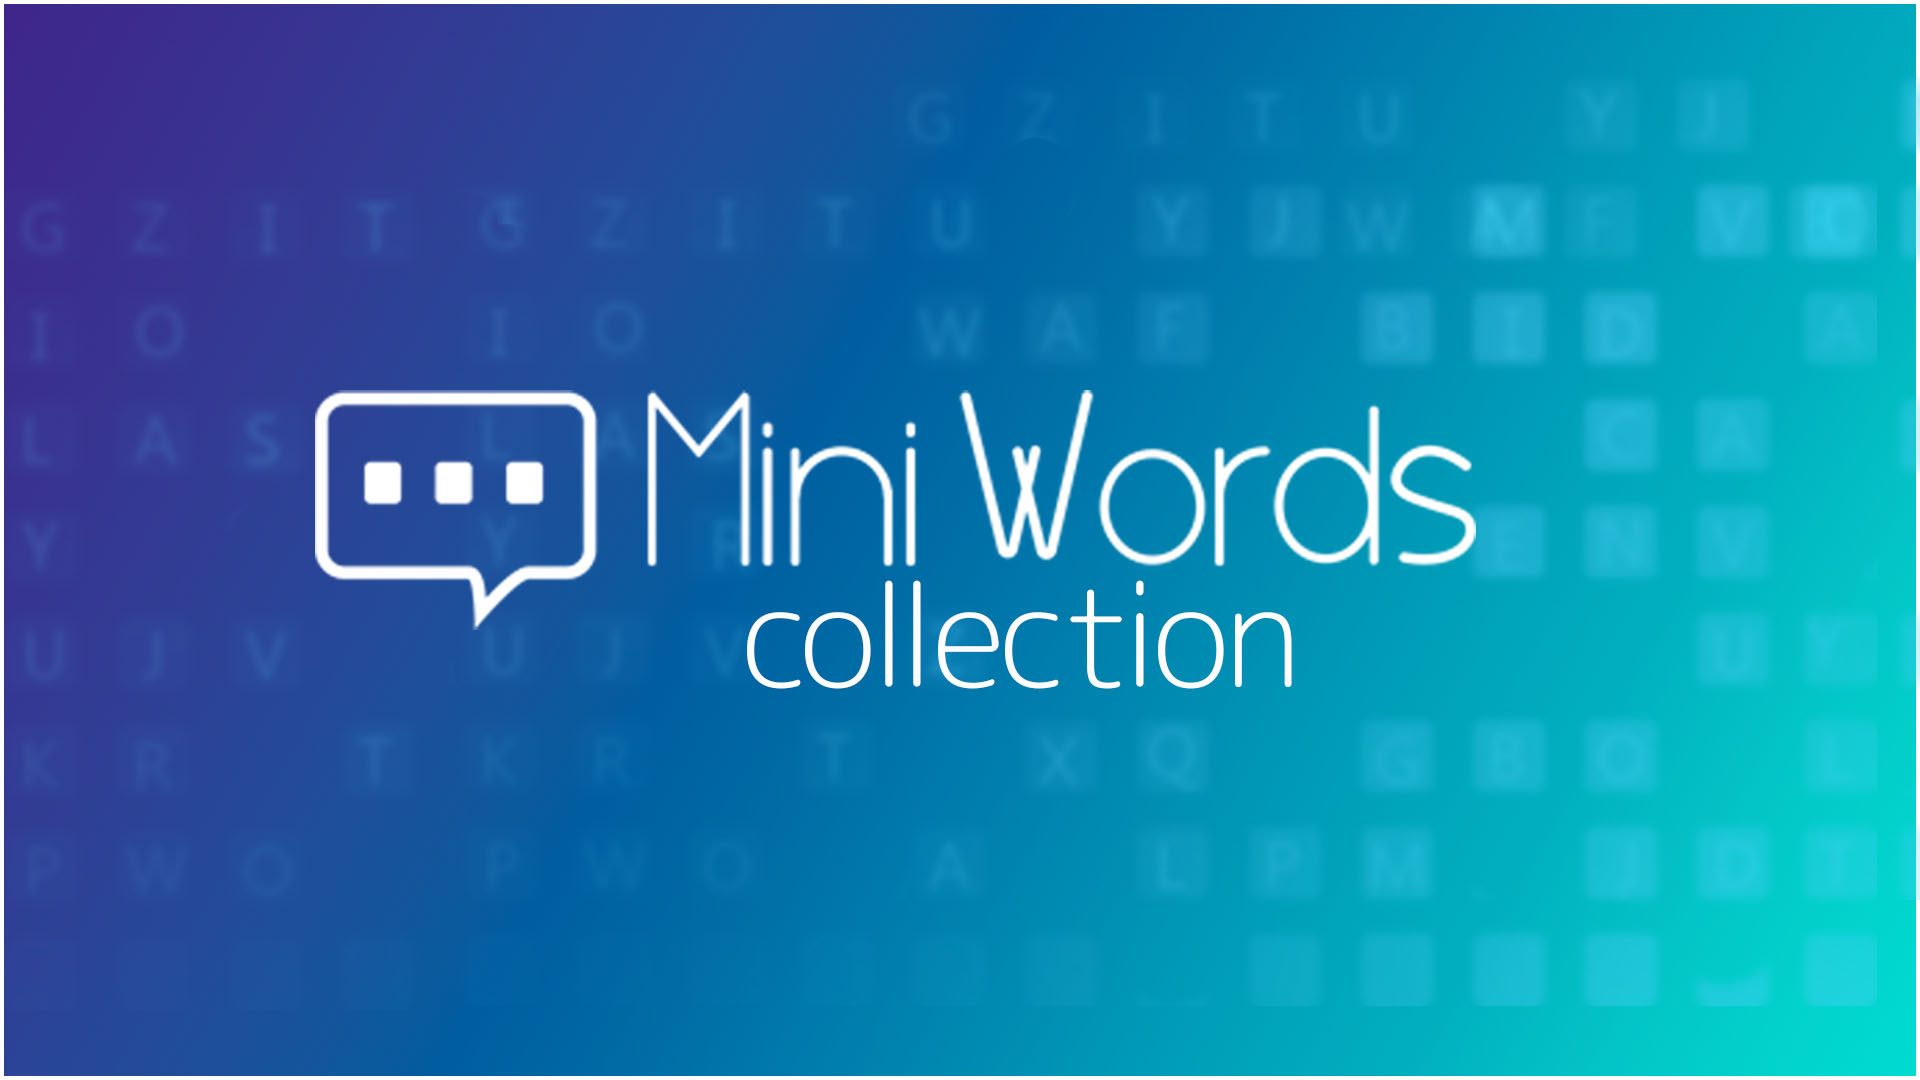 Mini Words Collection